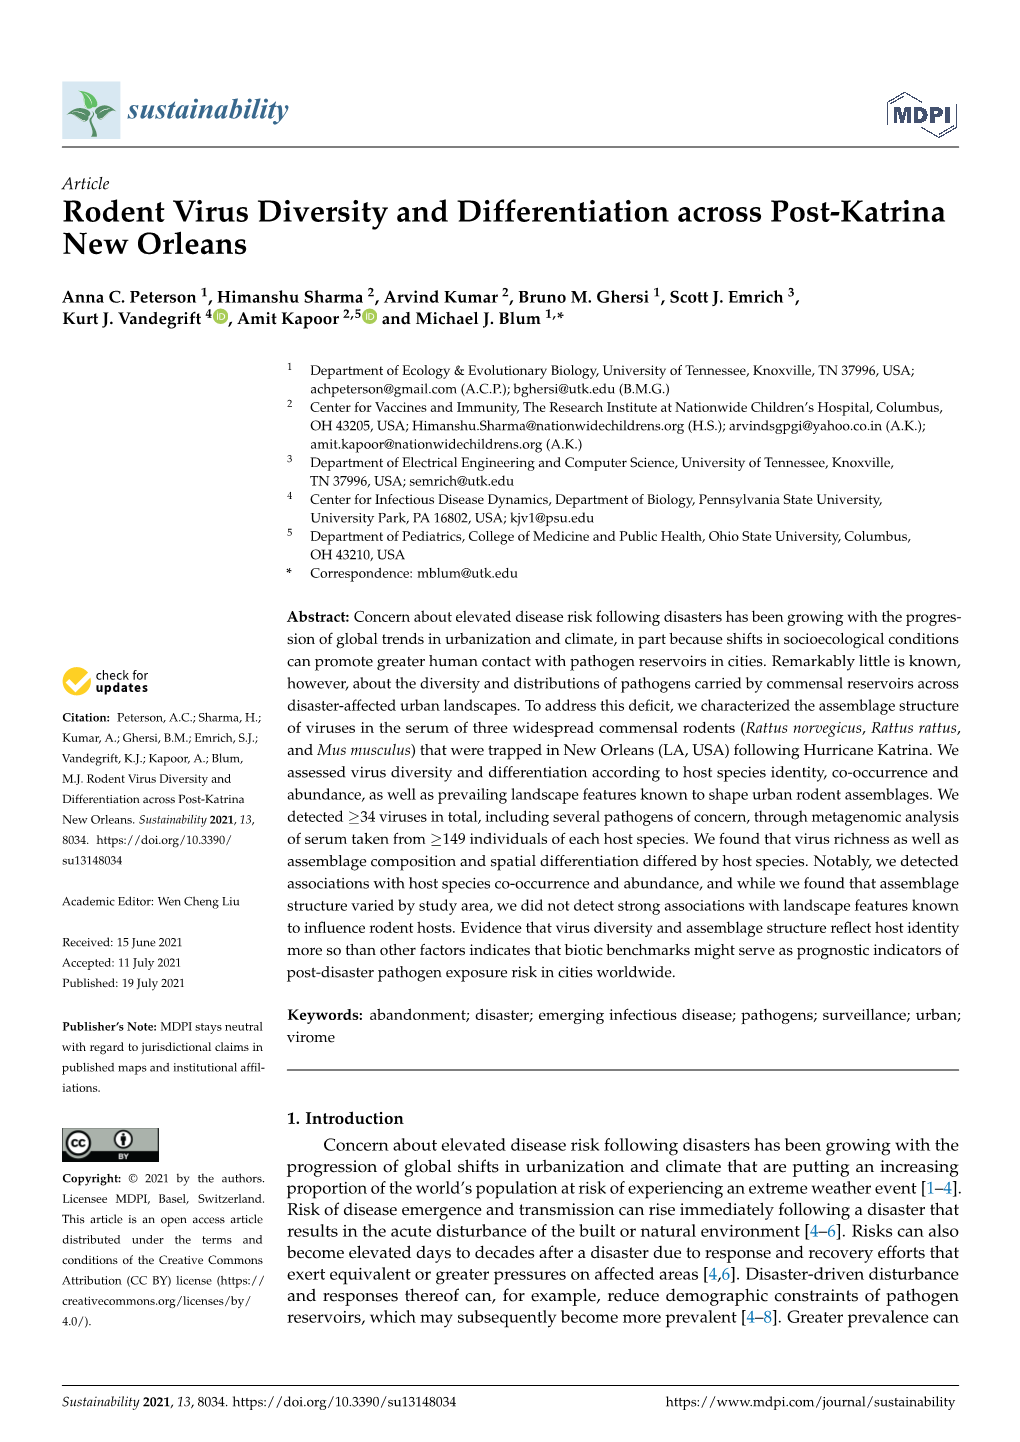 Rodent Virus Diversity and Differentiation Across Post-Katrina New Orleans